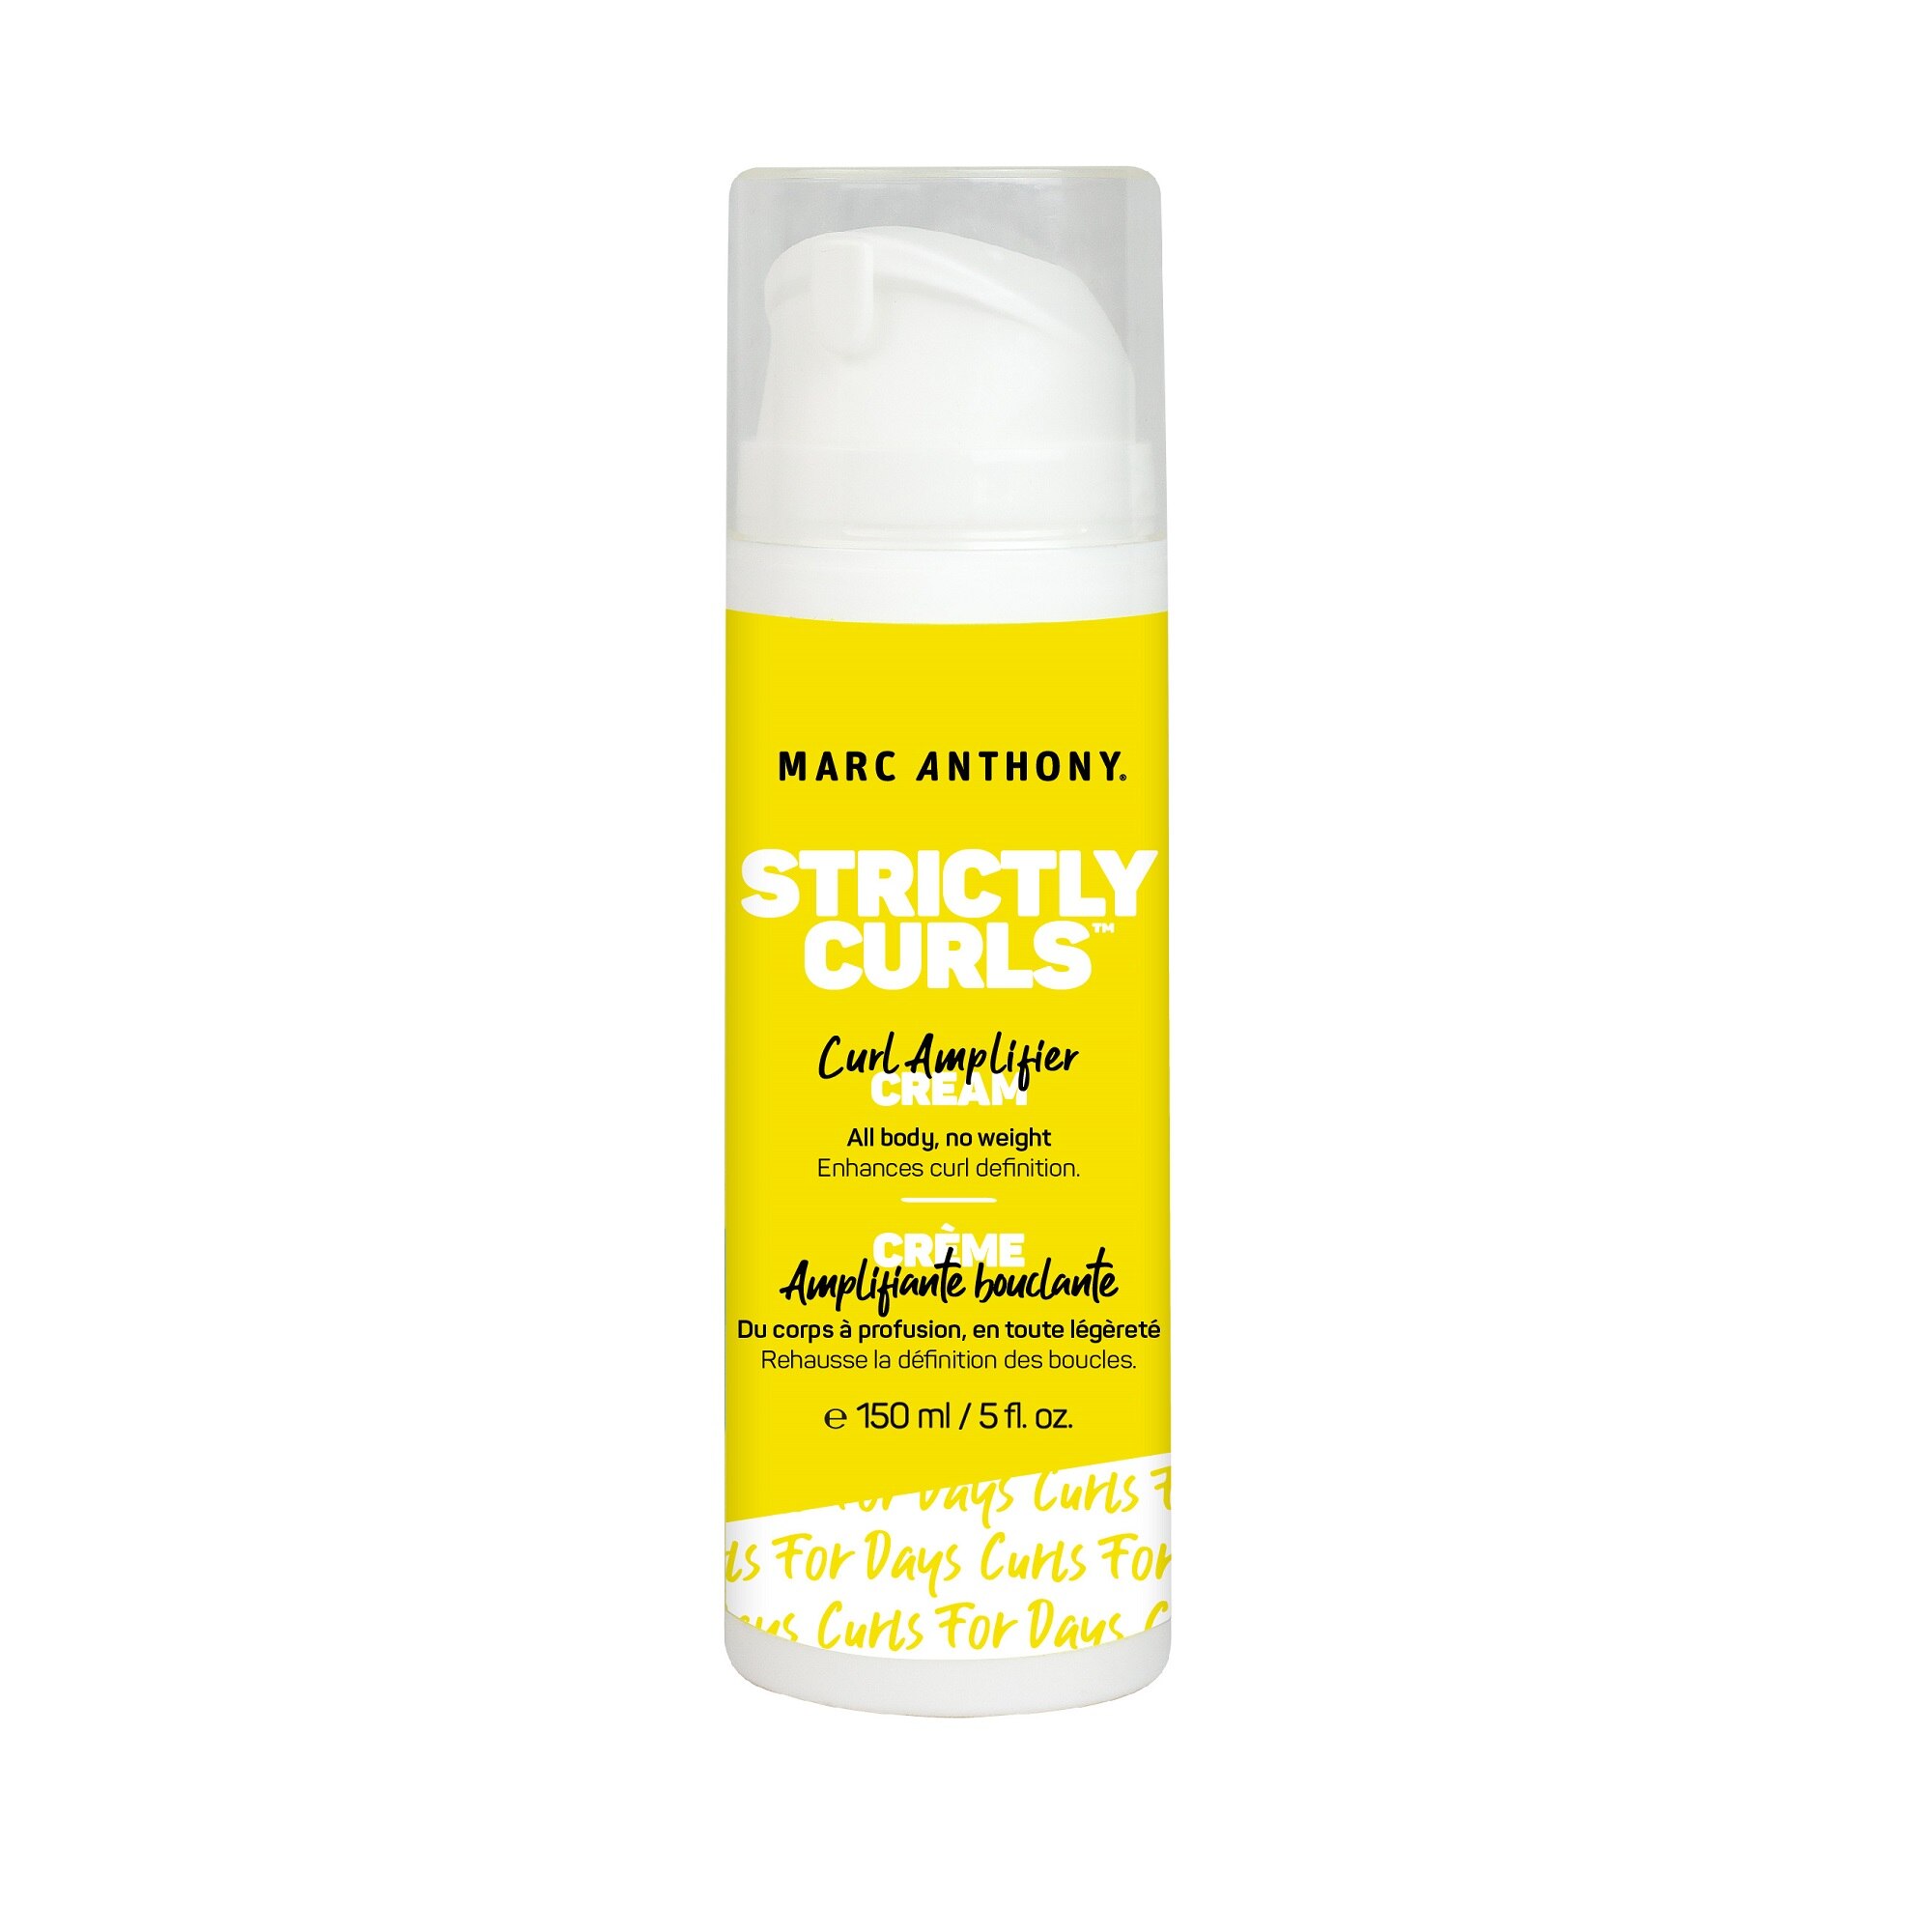 Marc Anthony Strictly Curls Curl Amplifier, 5.1 OZ